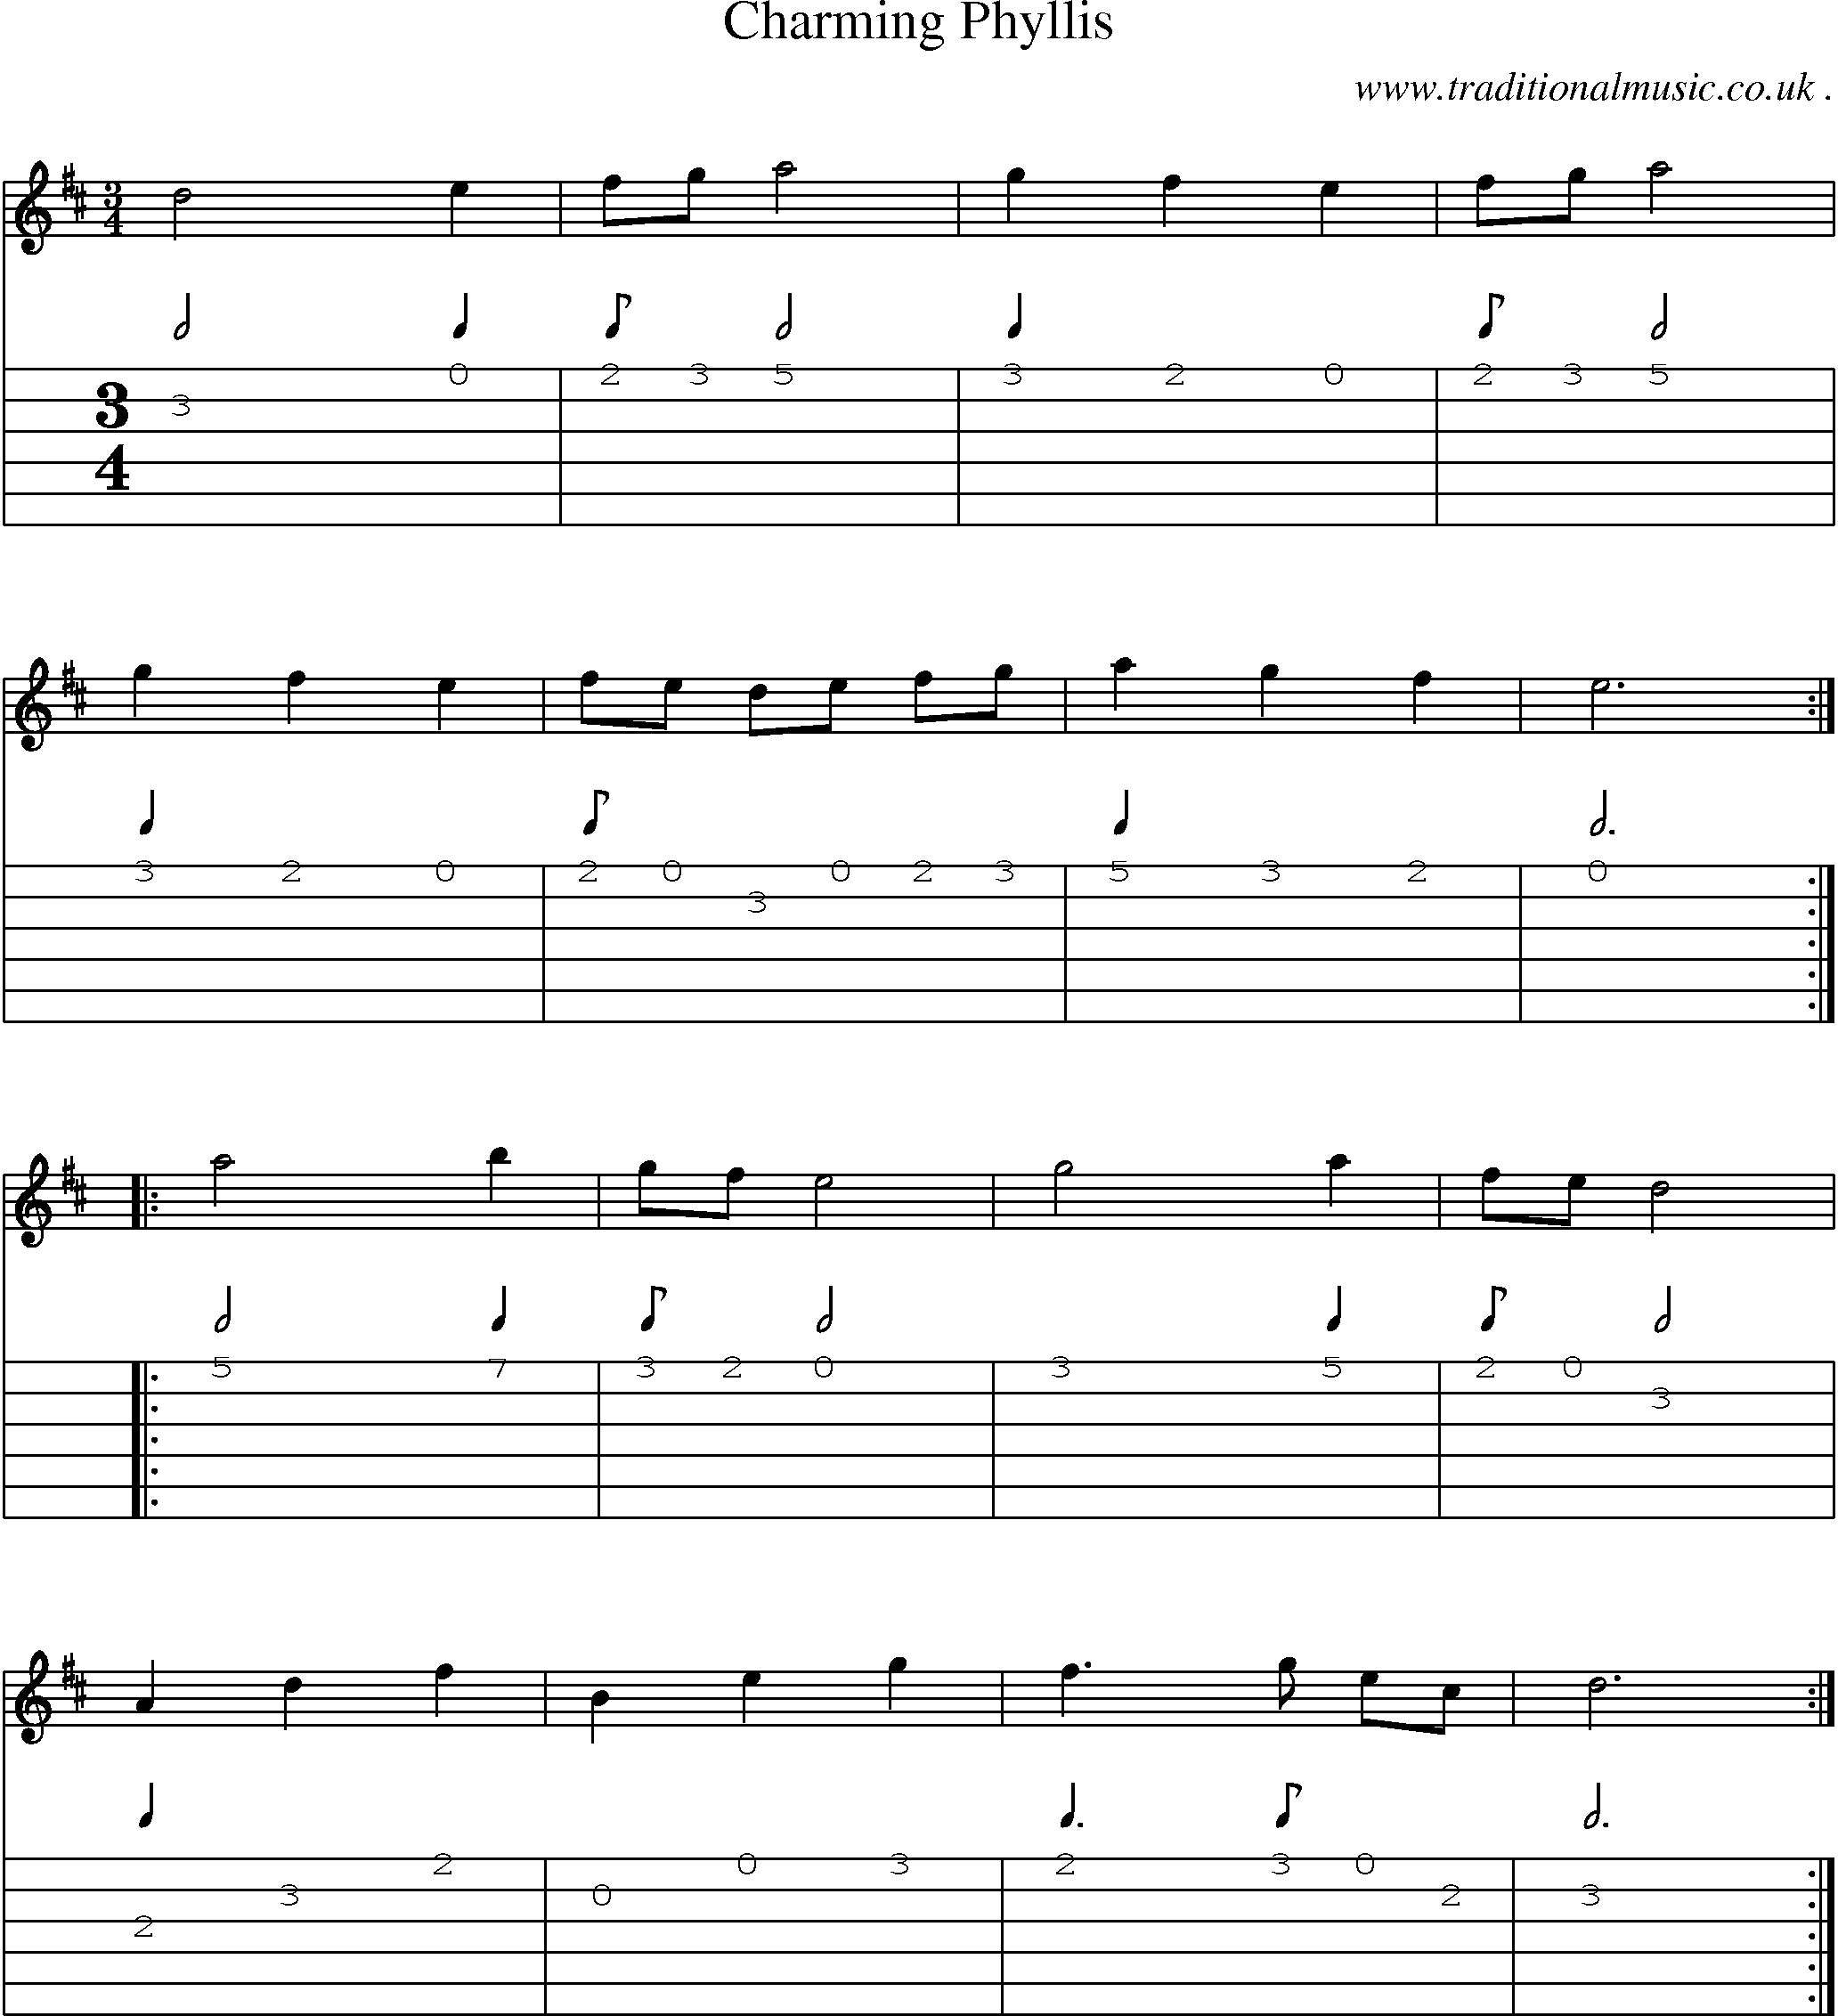 Sheet-Music and Guitar Tabs for Charming Phyllis